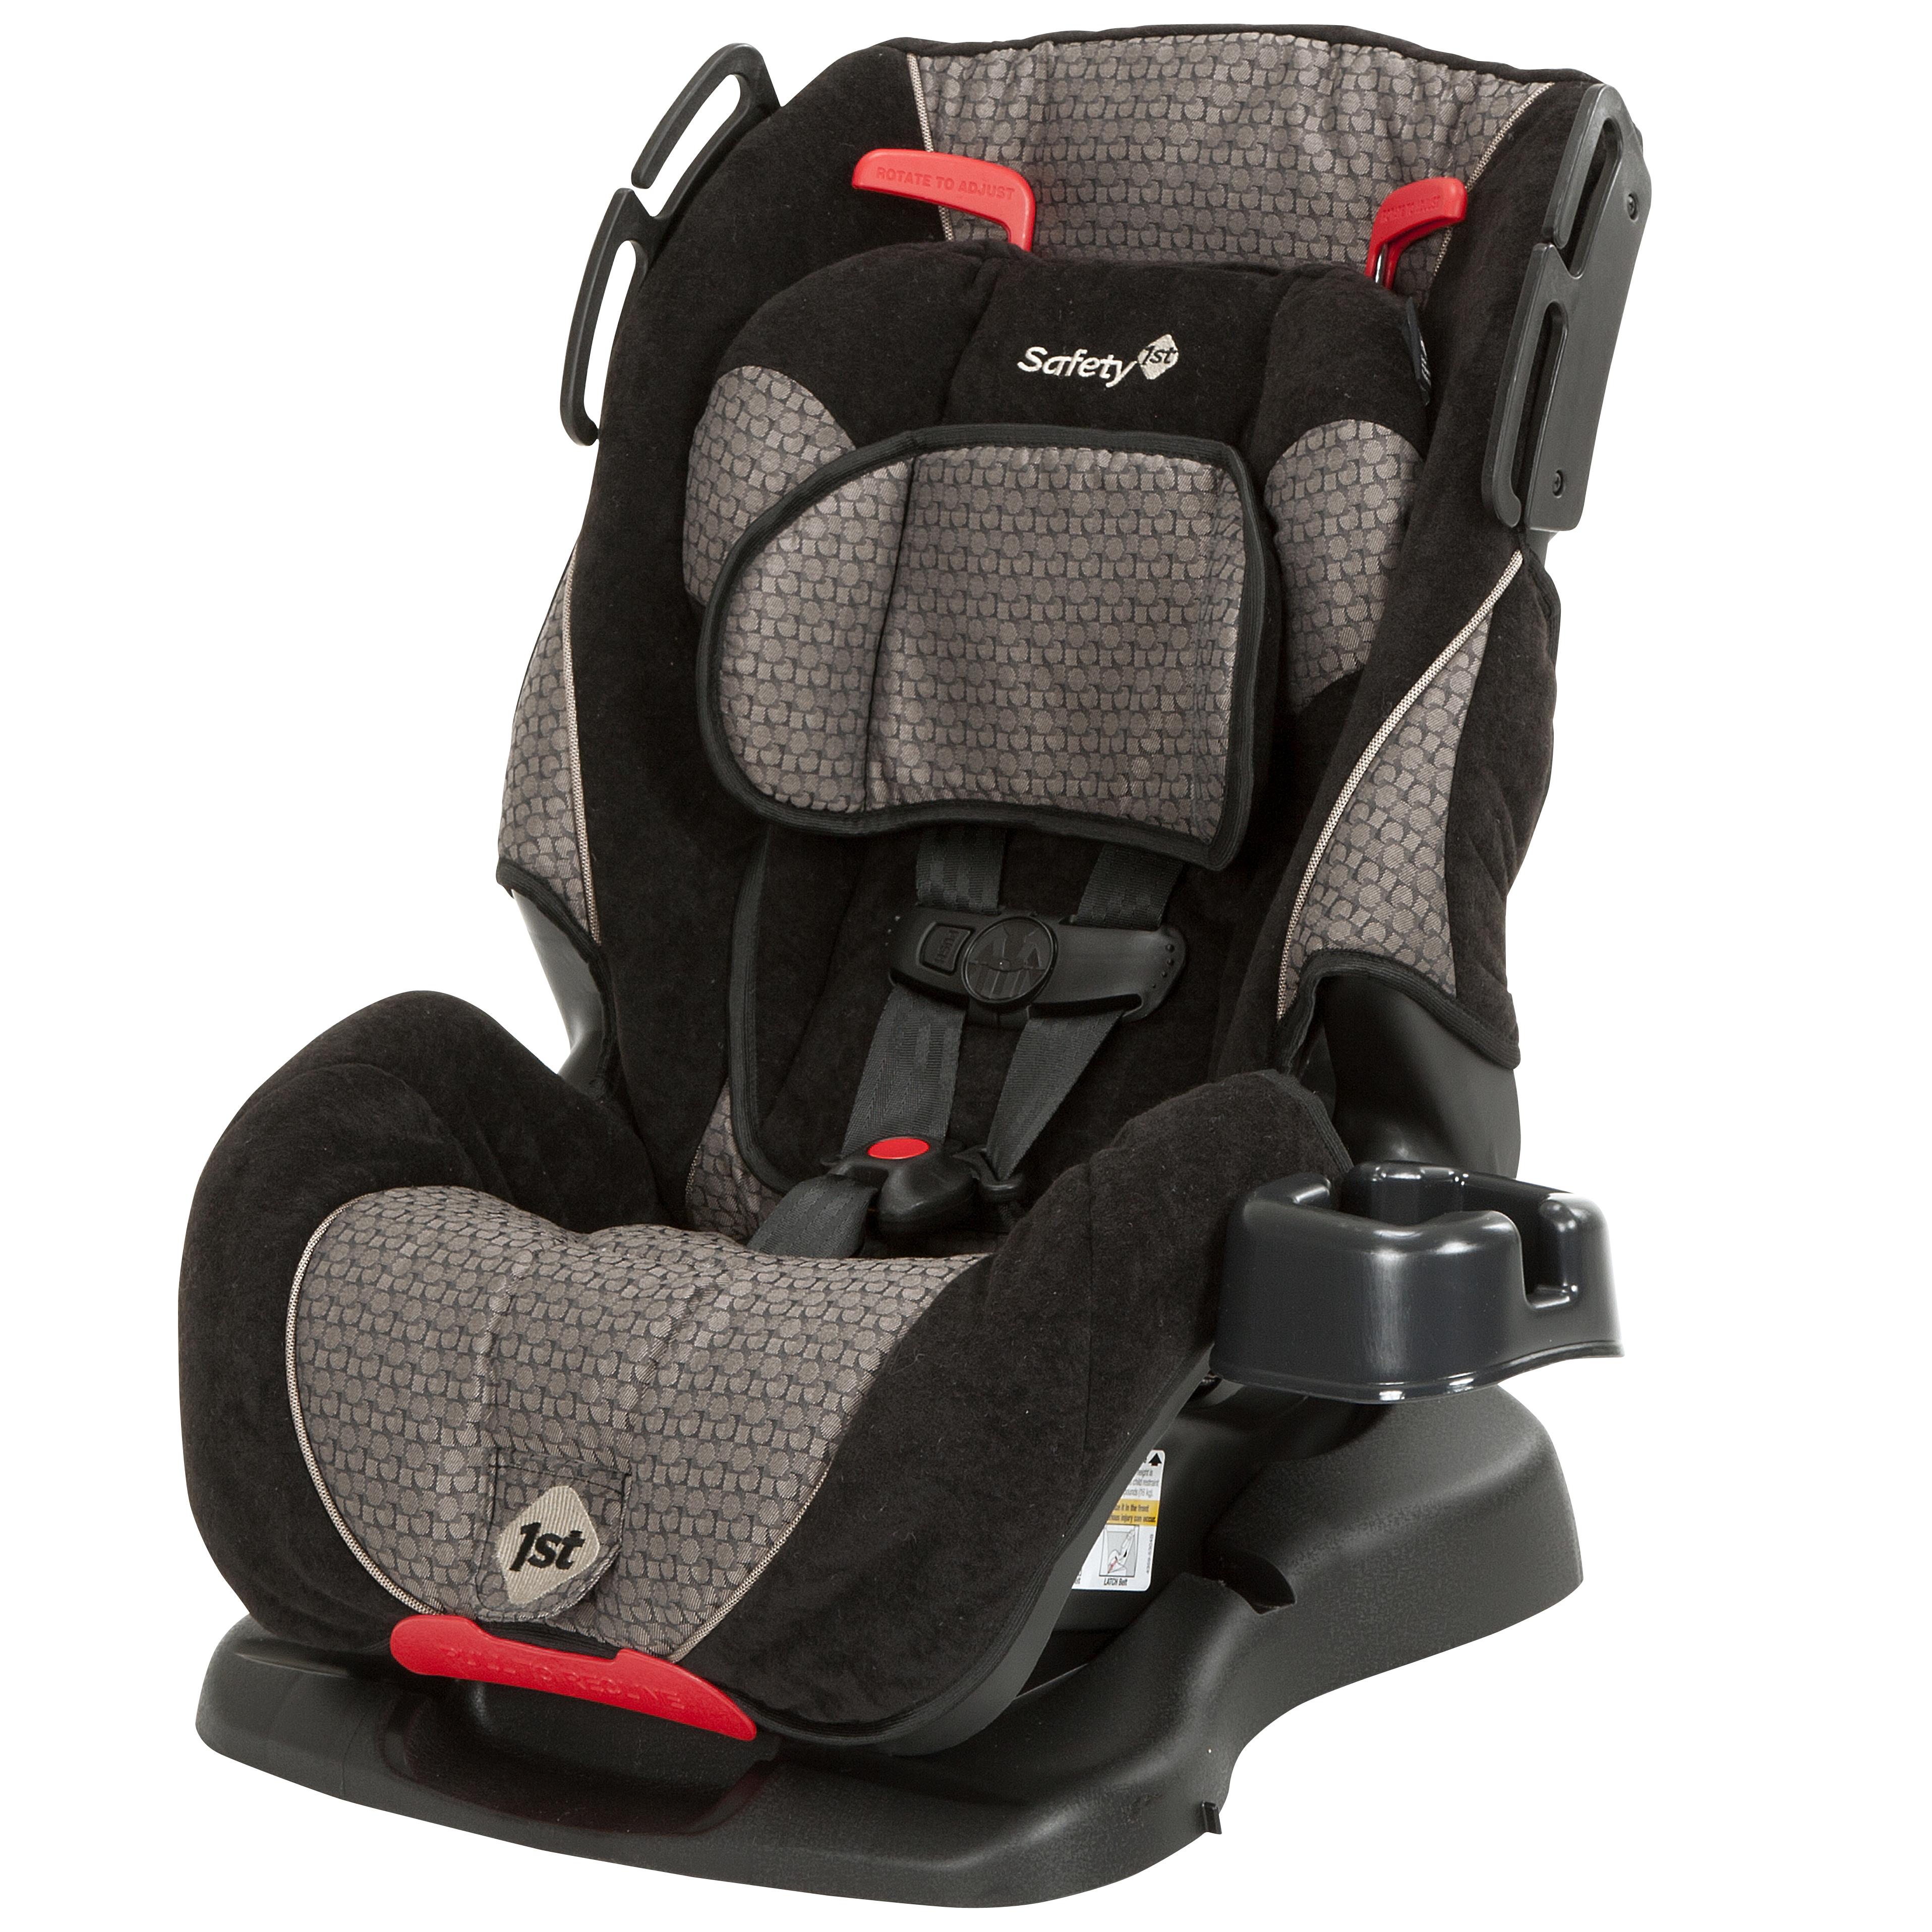 Safety 1st All-in-One Convertible Car Seat - Dorian - image 2 of 2